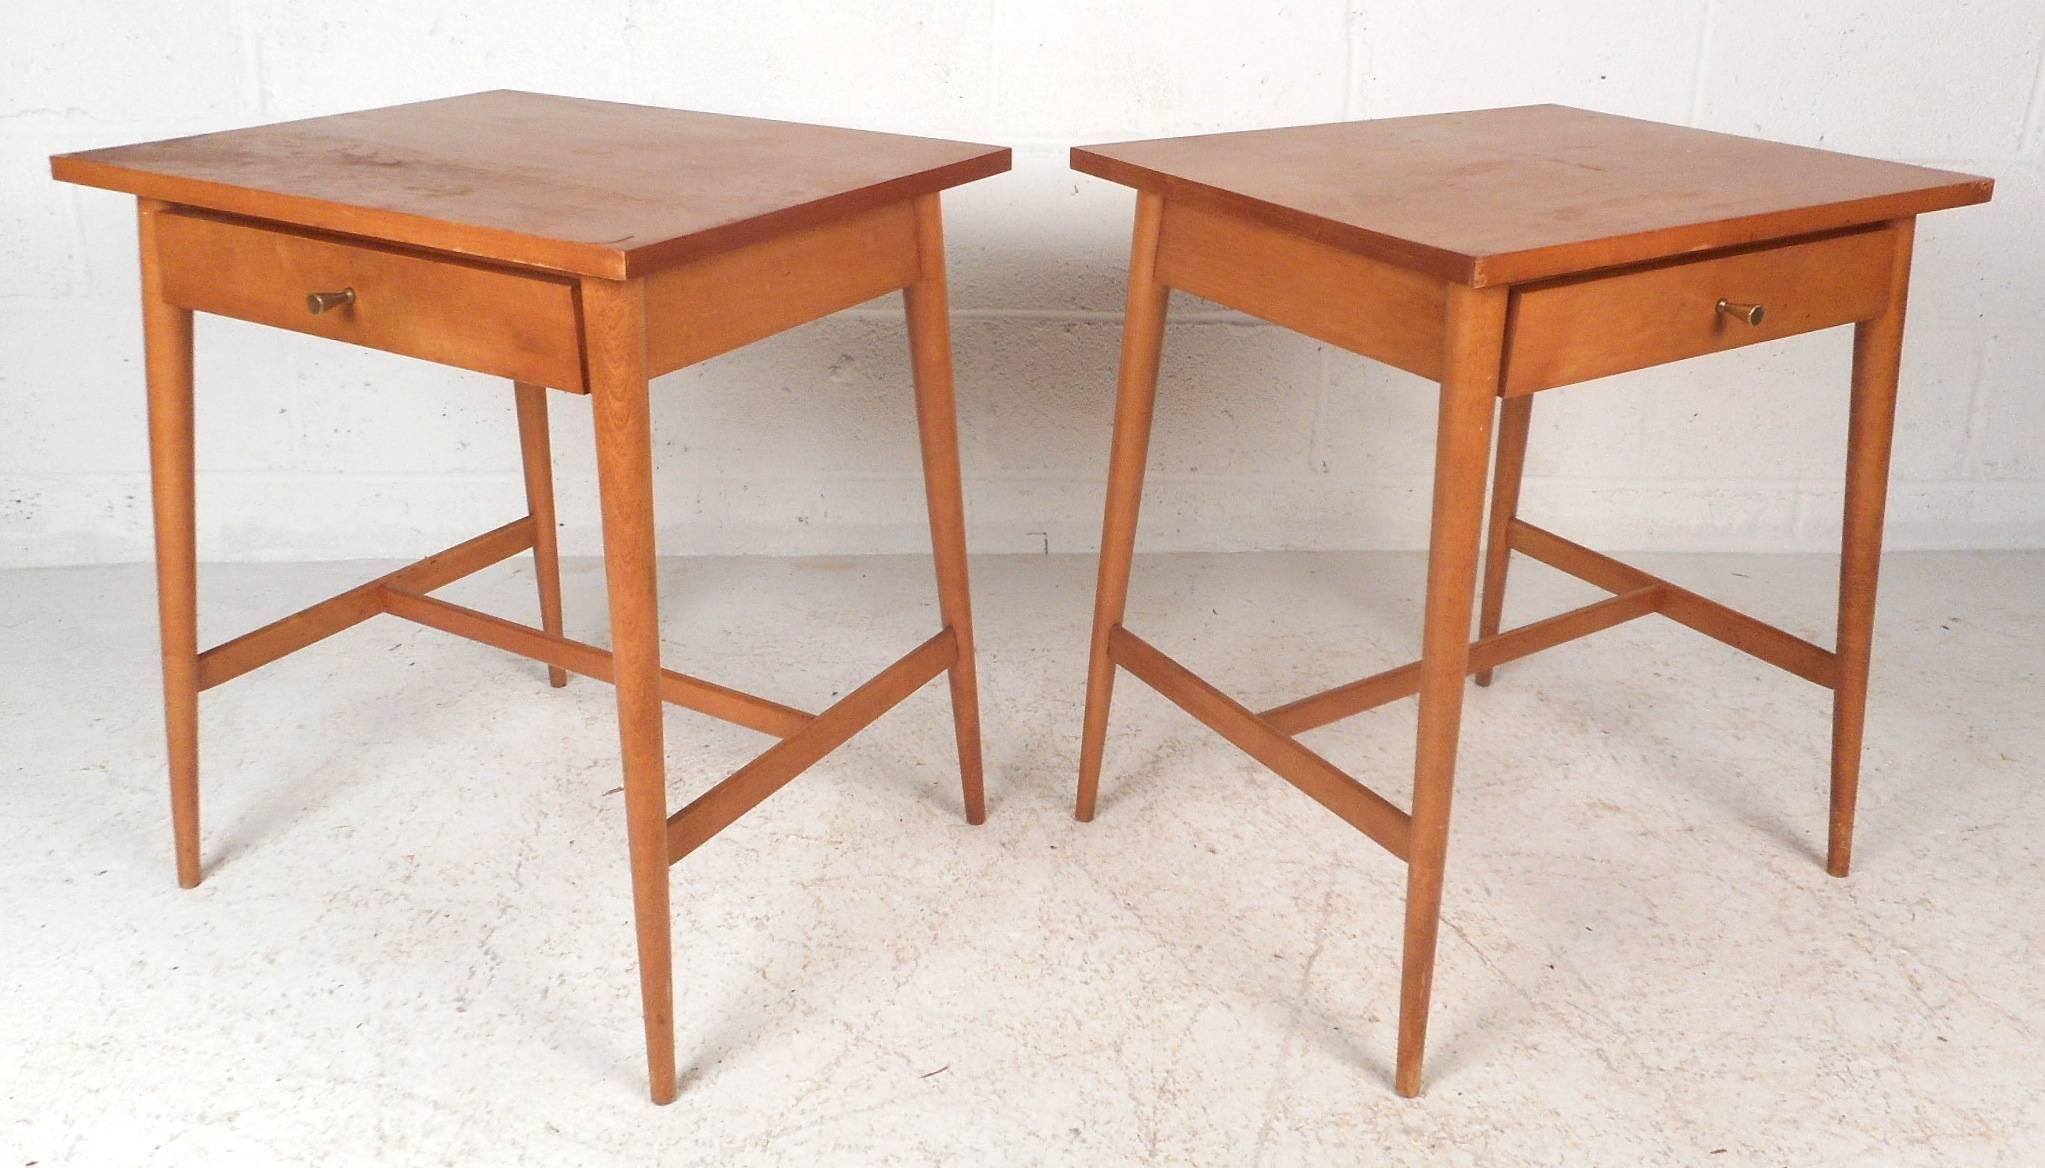 Beautiful pair of Mid-Century Modern nightstands with a vintage blonde maple finish. This stylish piece features one drawer with a unique conical brass pull. Sleek design with an oversized top and splayed tapered legs with stretchers for added